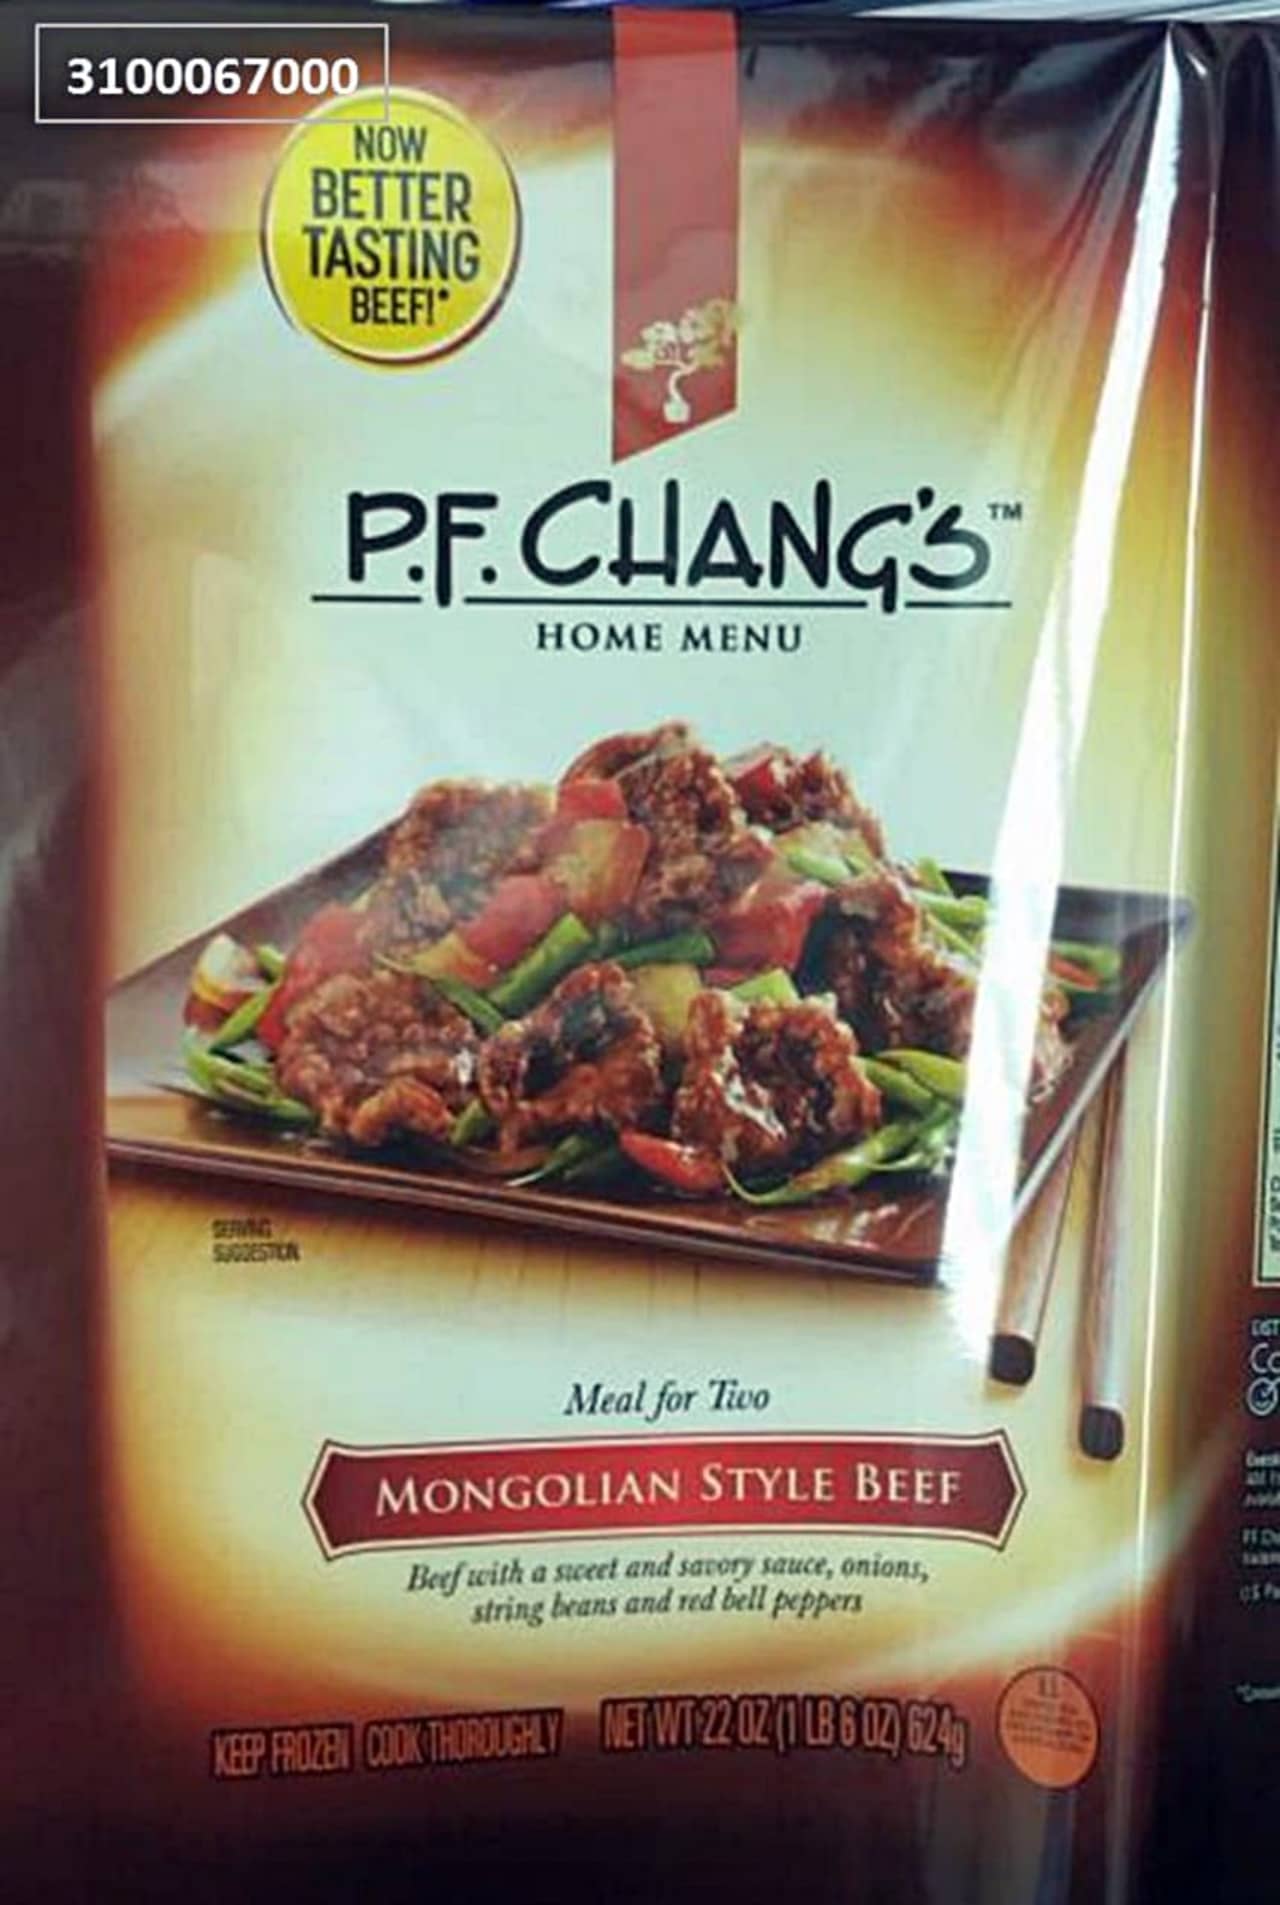 Conagra has expanded its recall of P.F. Chang's frozen meals.